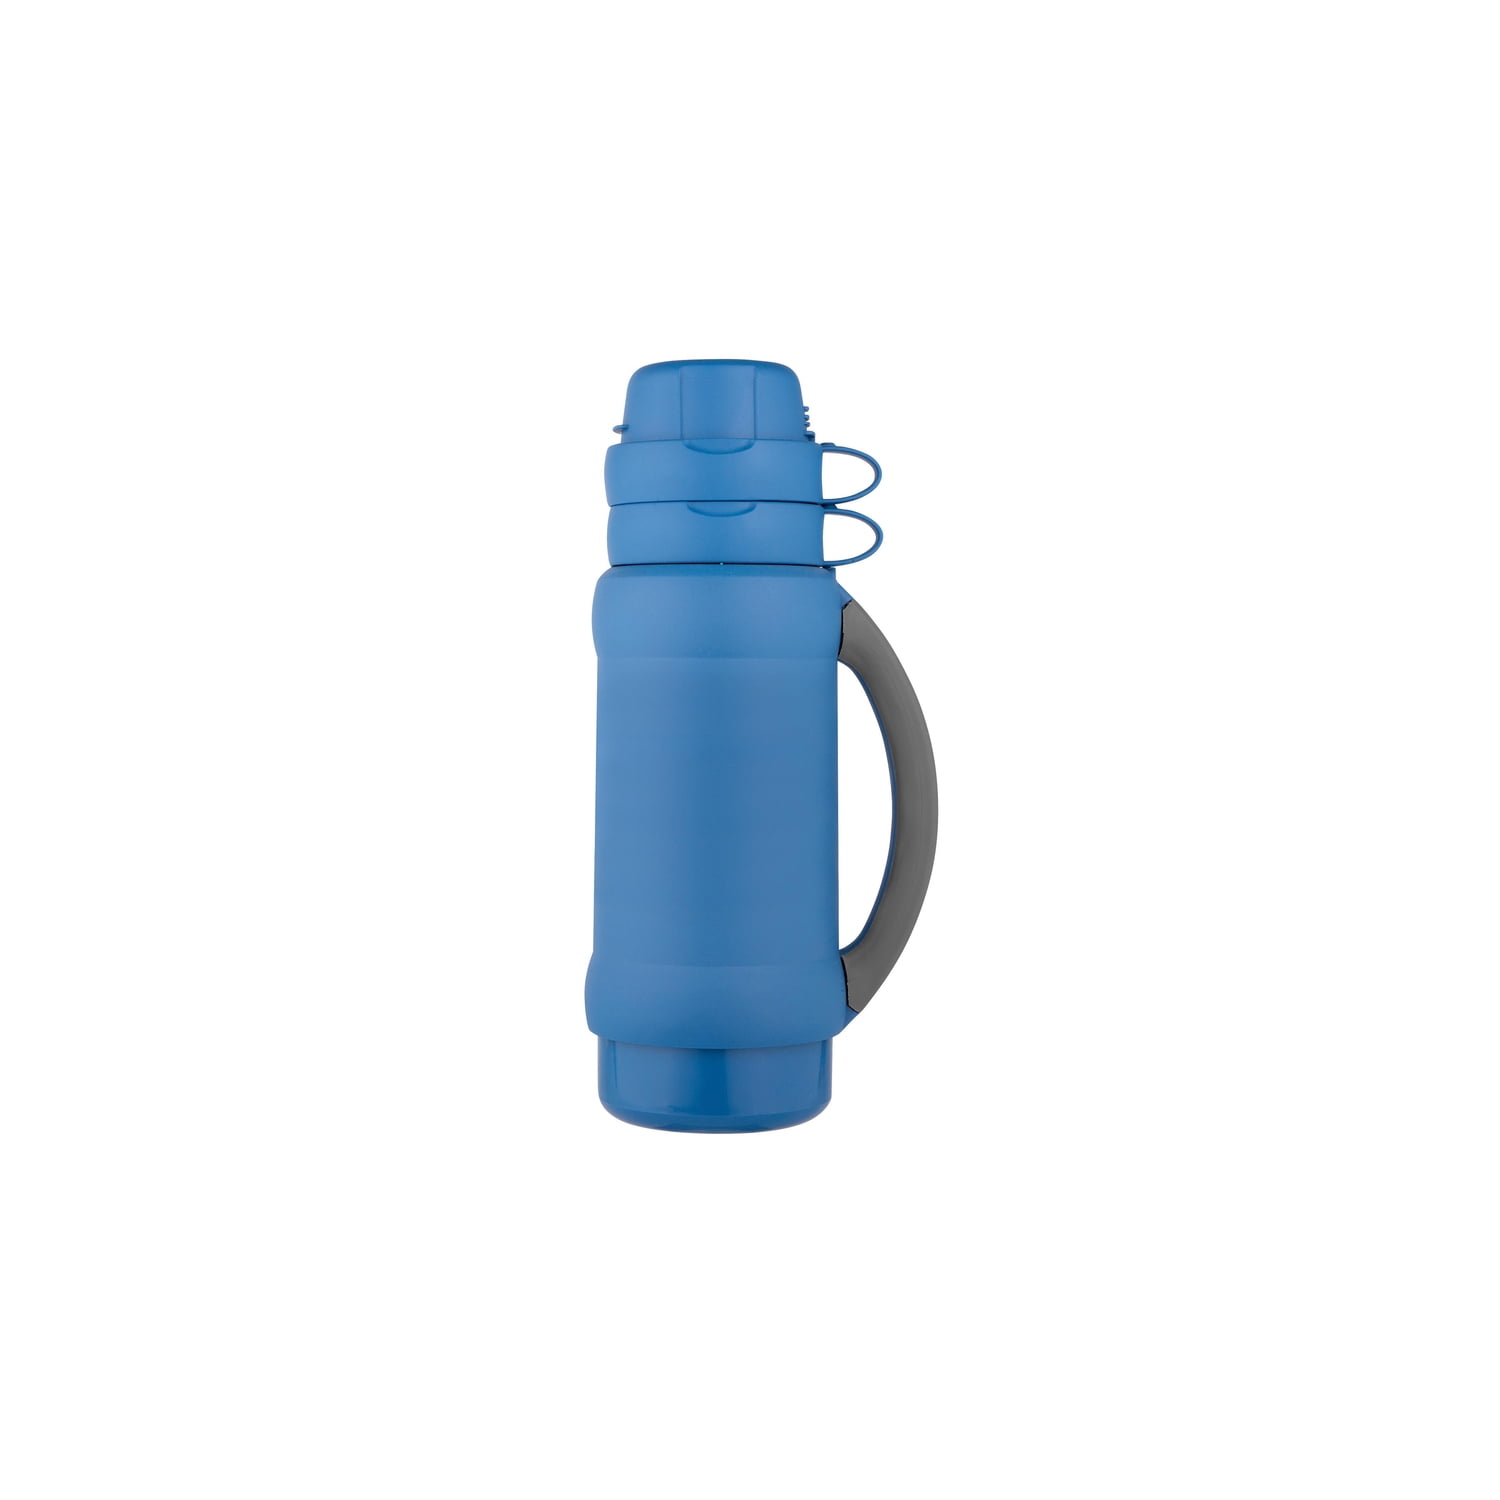 Thermos 1.1 QT Stainless Steel Beverage Bottle 2510tri2 for sale online 